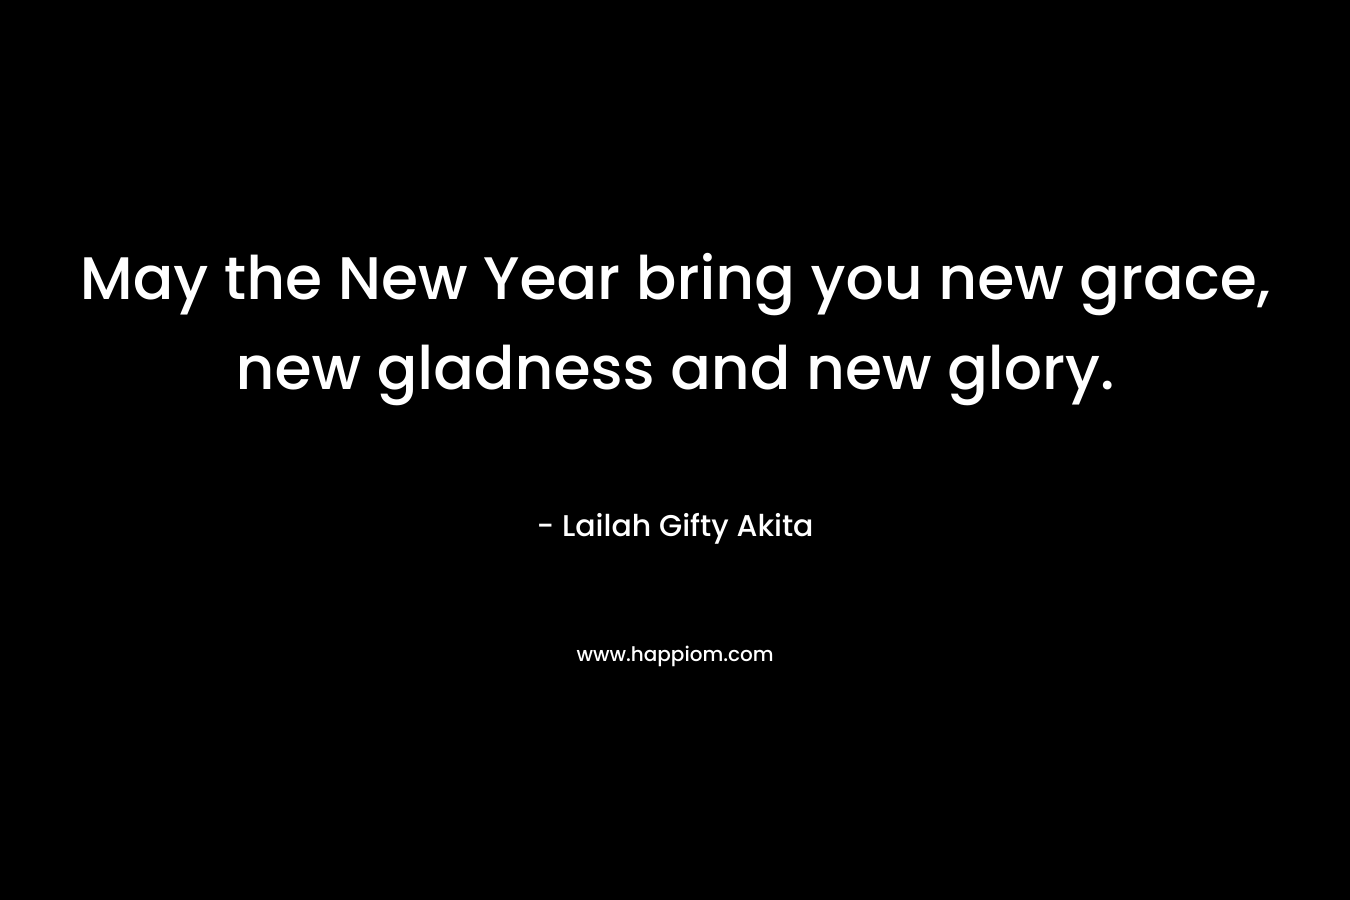 May the New Year bring you new grace, new gladness and new glory.